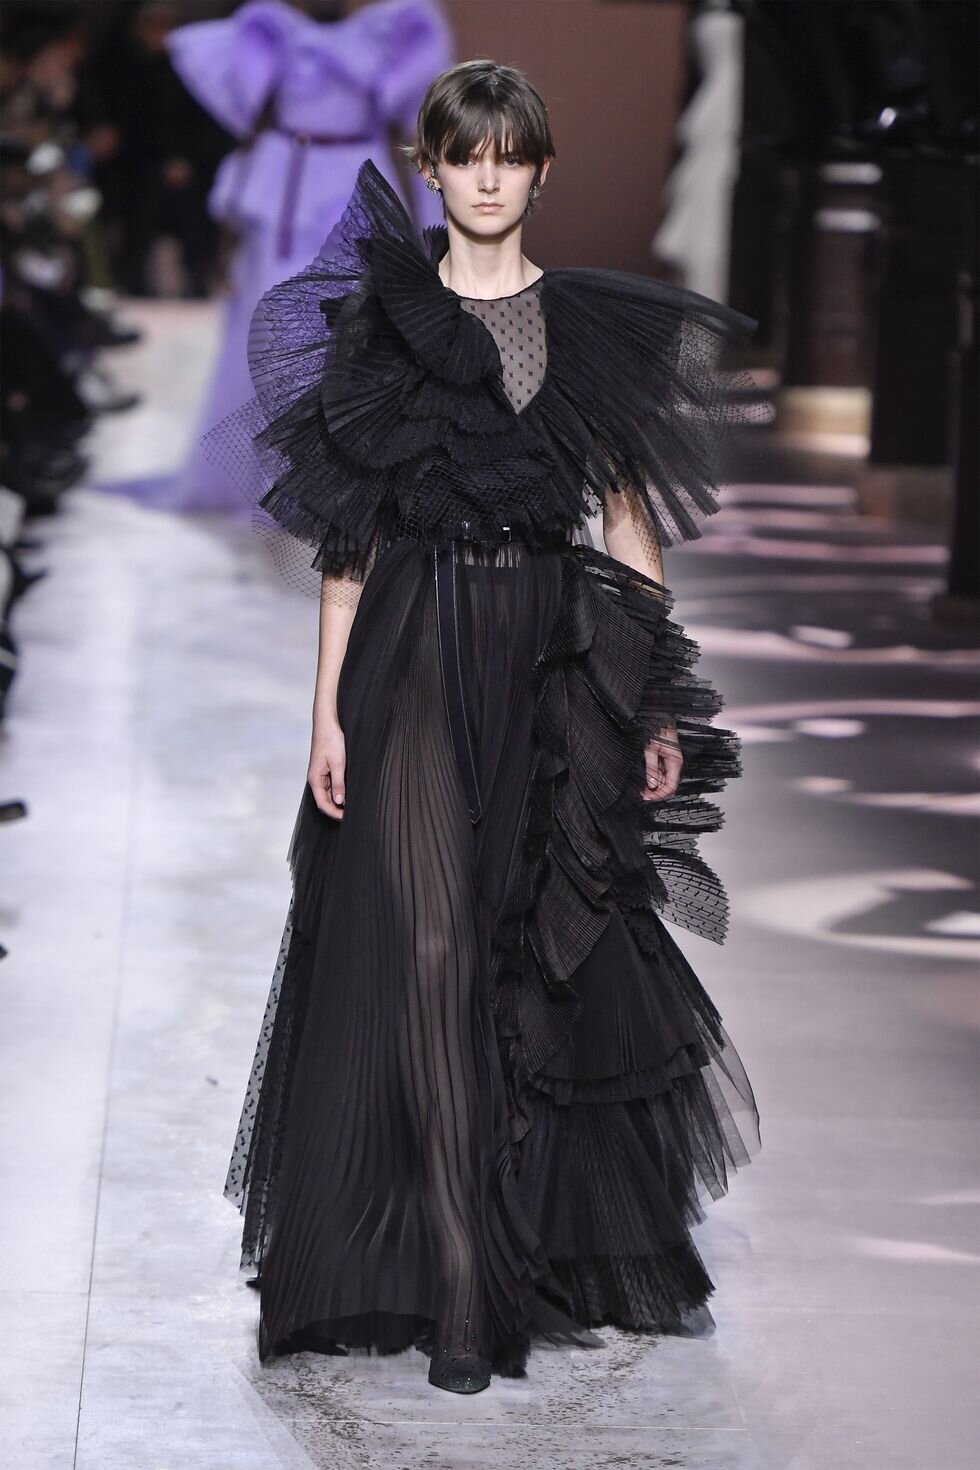 hbz-couture-2020-givenchy-02-1579723506.jpg